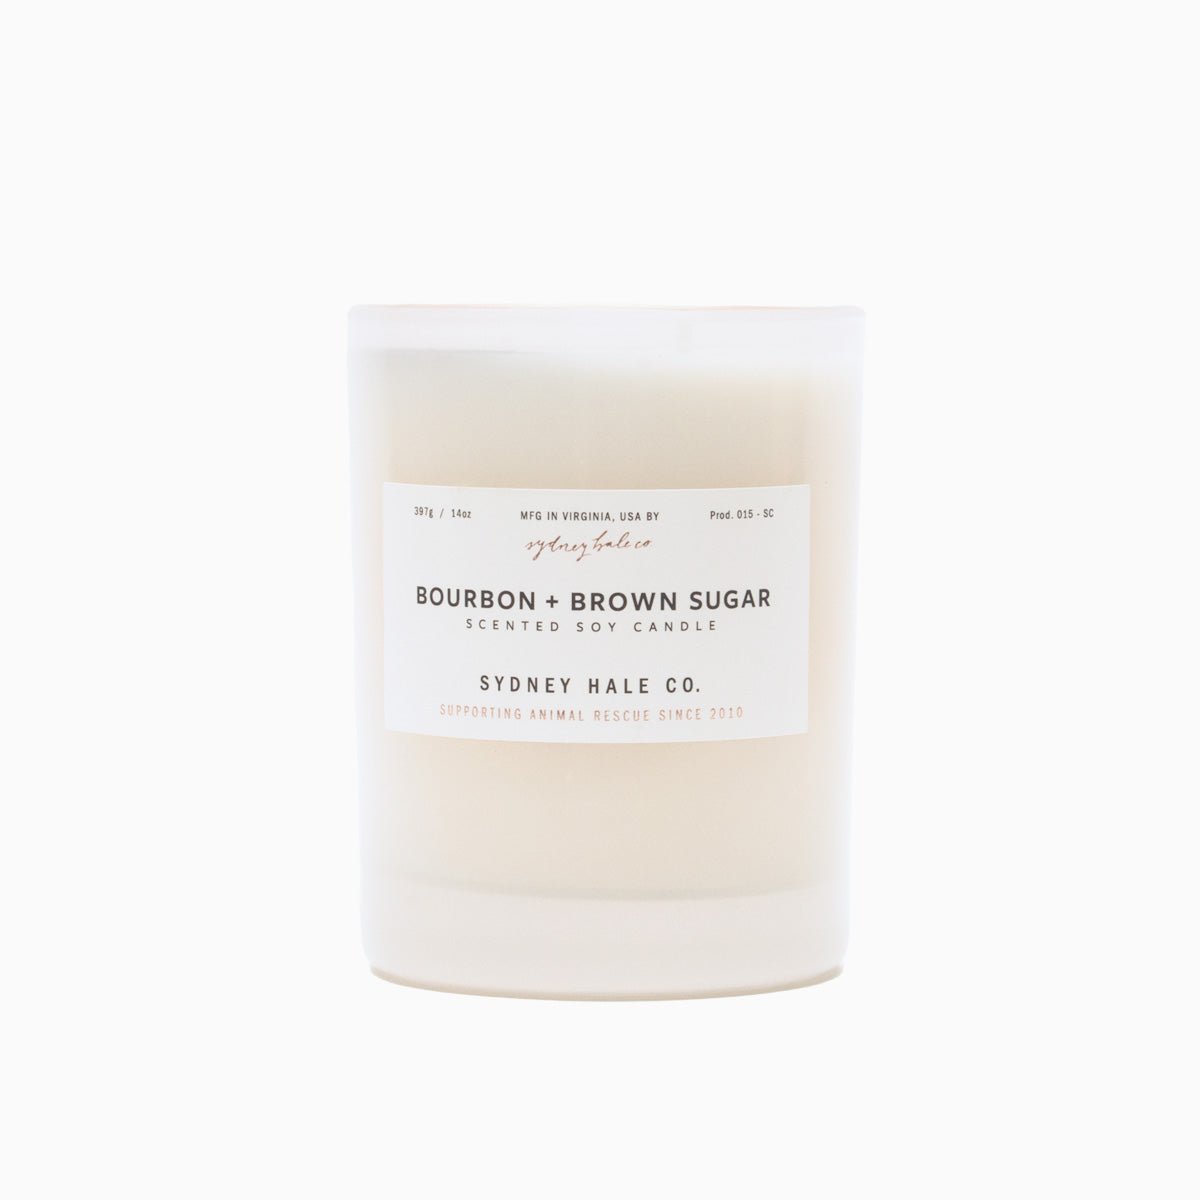 A cylindrical glass candle filled with a soy wax blend and two double cotton wicks. Label reads: "397g/14 oz. Manufactured in Virginia, USA by Sydney Hale Co. Bourbon + Brown Sugar scented soy candle. Sydney Hale Co. Supporting Animal rescue since 2010."